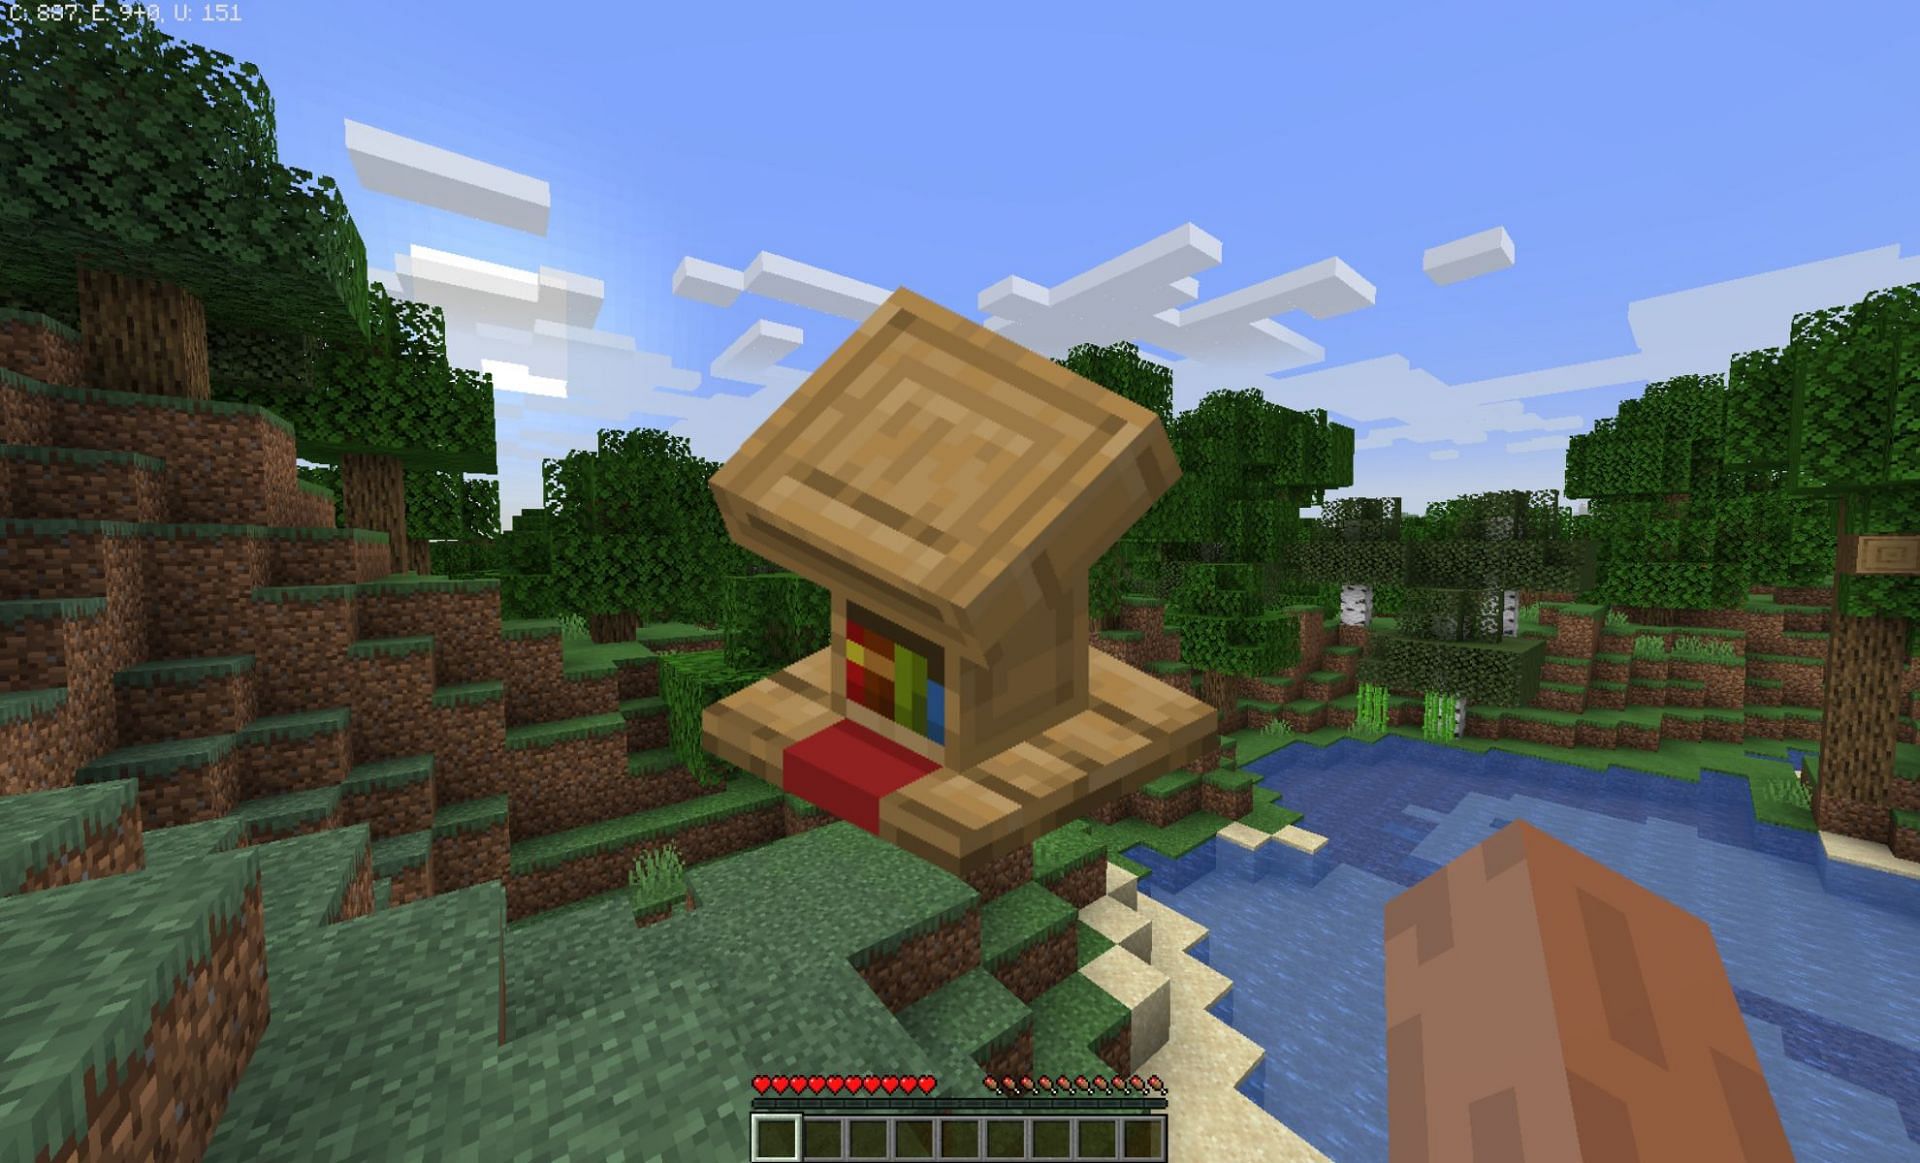 Lectern (Images via Minecraft Wiki)